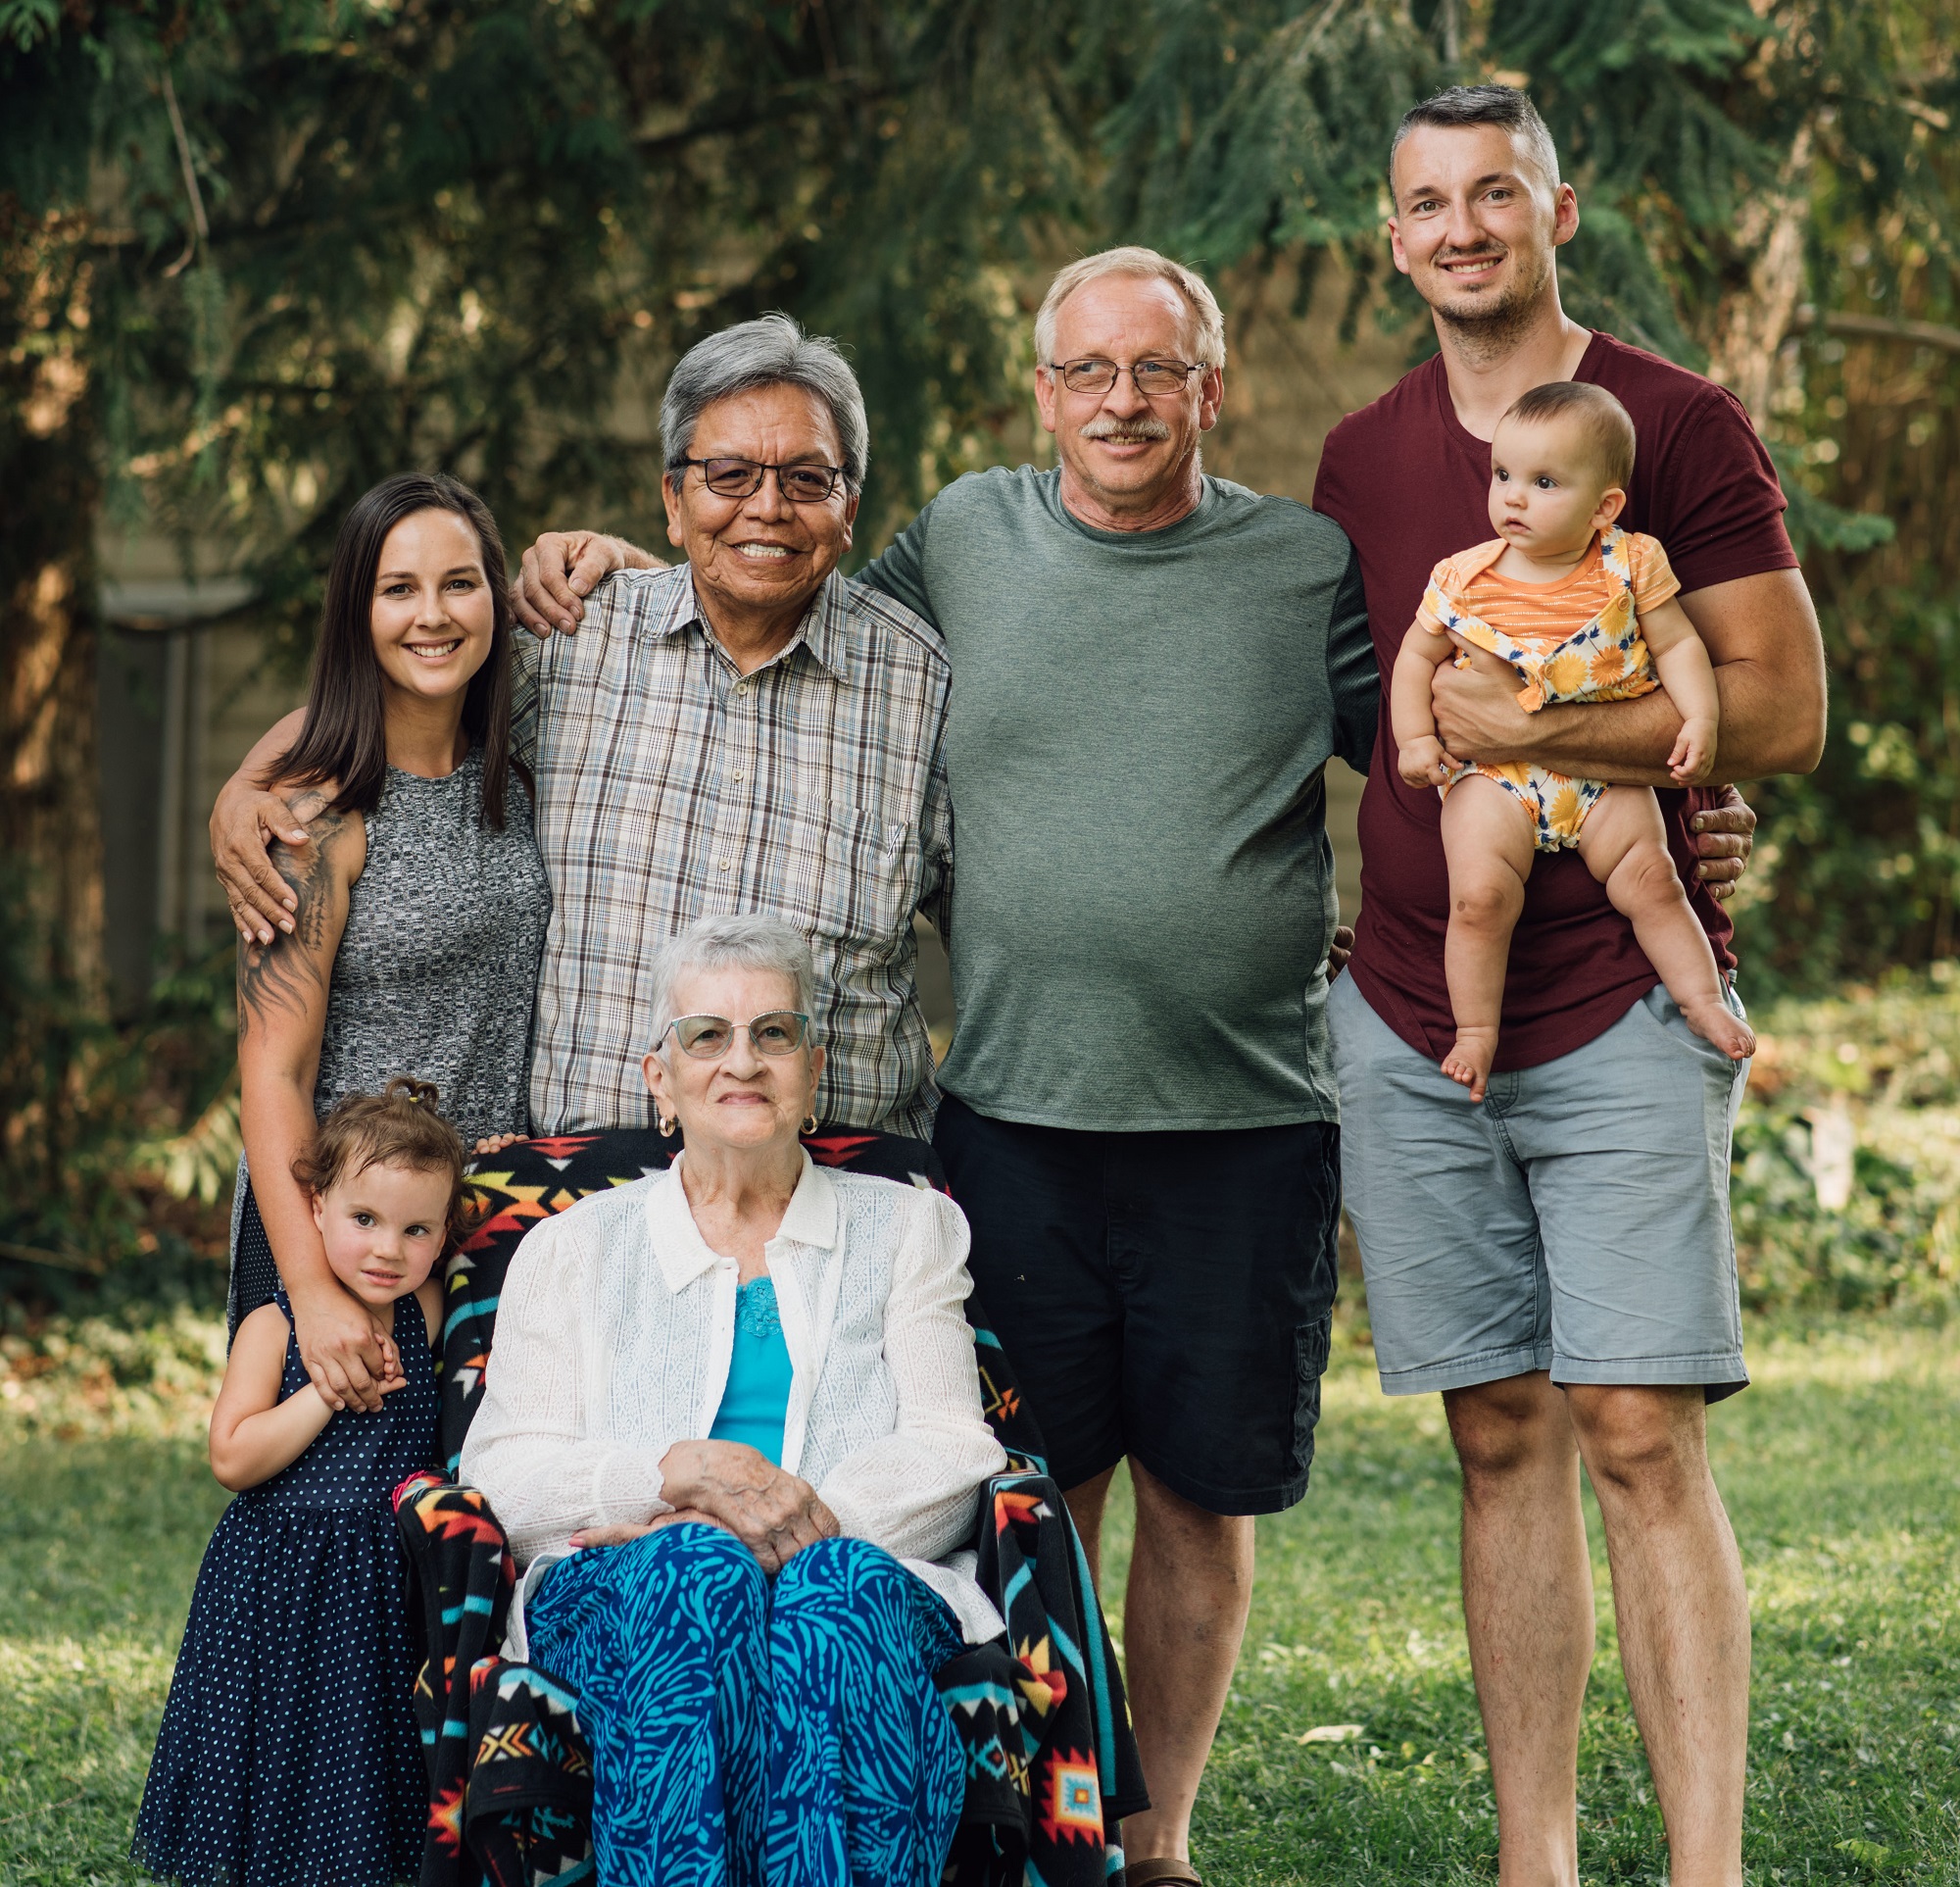 outdoor Intergenerational family photoshoot for 7 placed in two rows. 5 in the back row all standing shortest to tallest to include (left to right) one adult female, two elderly males and 1 adult male holding a toddler. Front row a small female child standing next to a seated elderly woman. All smiling. 